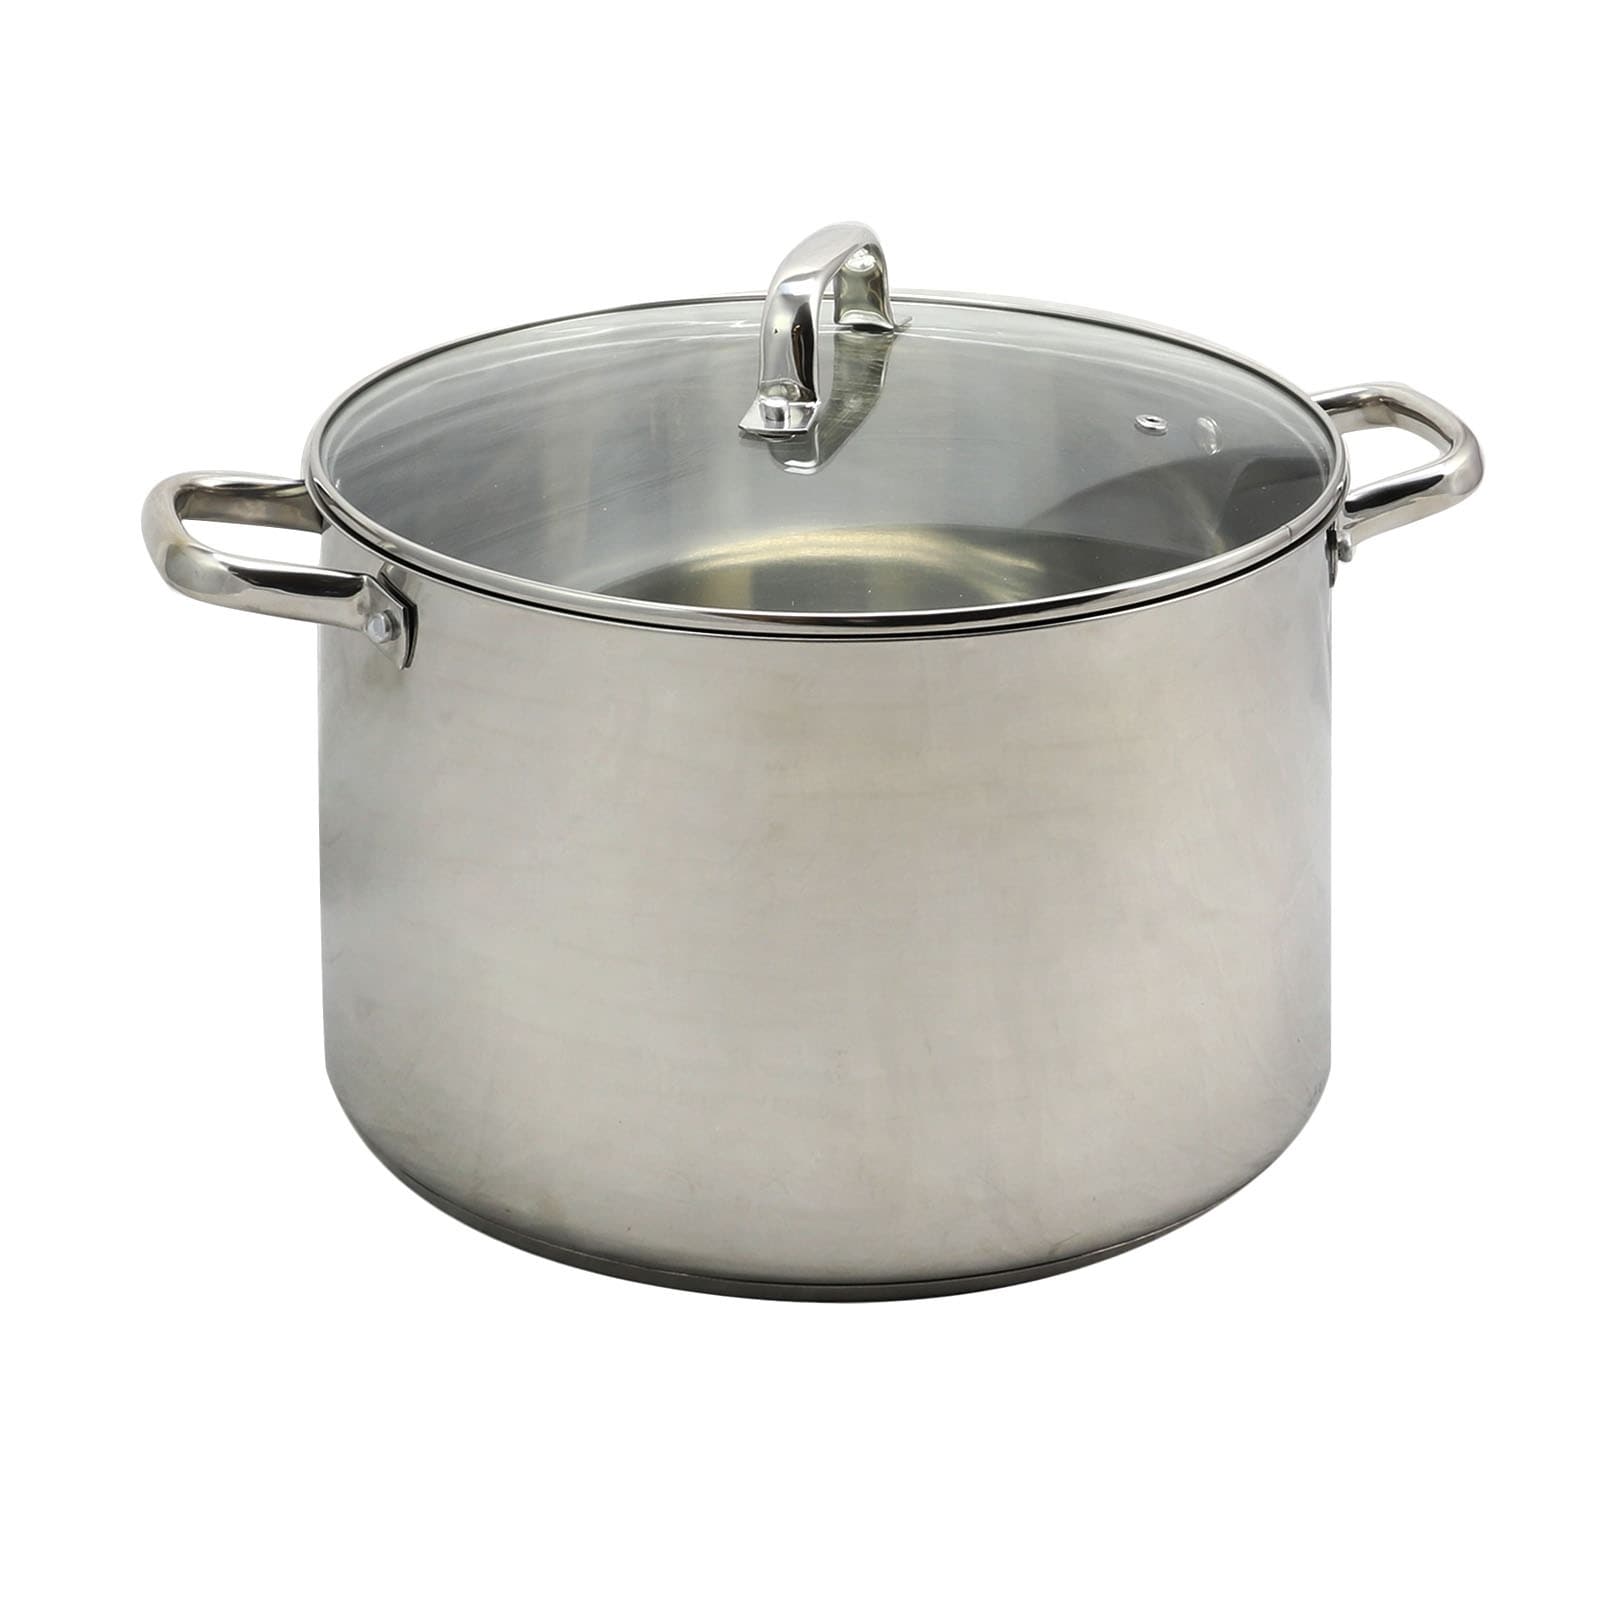 https://ak1.ostkcdn.com/images/products/is/images/direct/e3cafd7f6d2d4d5ad56d71f64dcca34b8f1c26bc/Oster-Adenmore-16-Quart-Stainless-Steel-Stock-Pot-With-Tempered-Glass-Lid.jpg